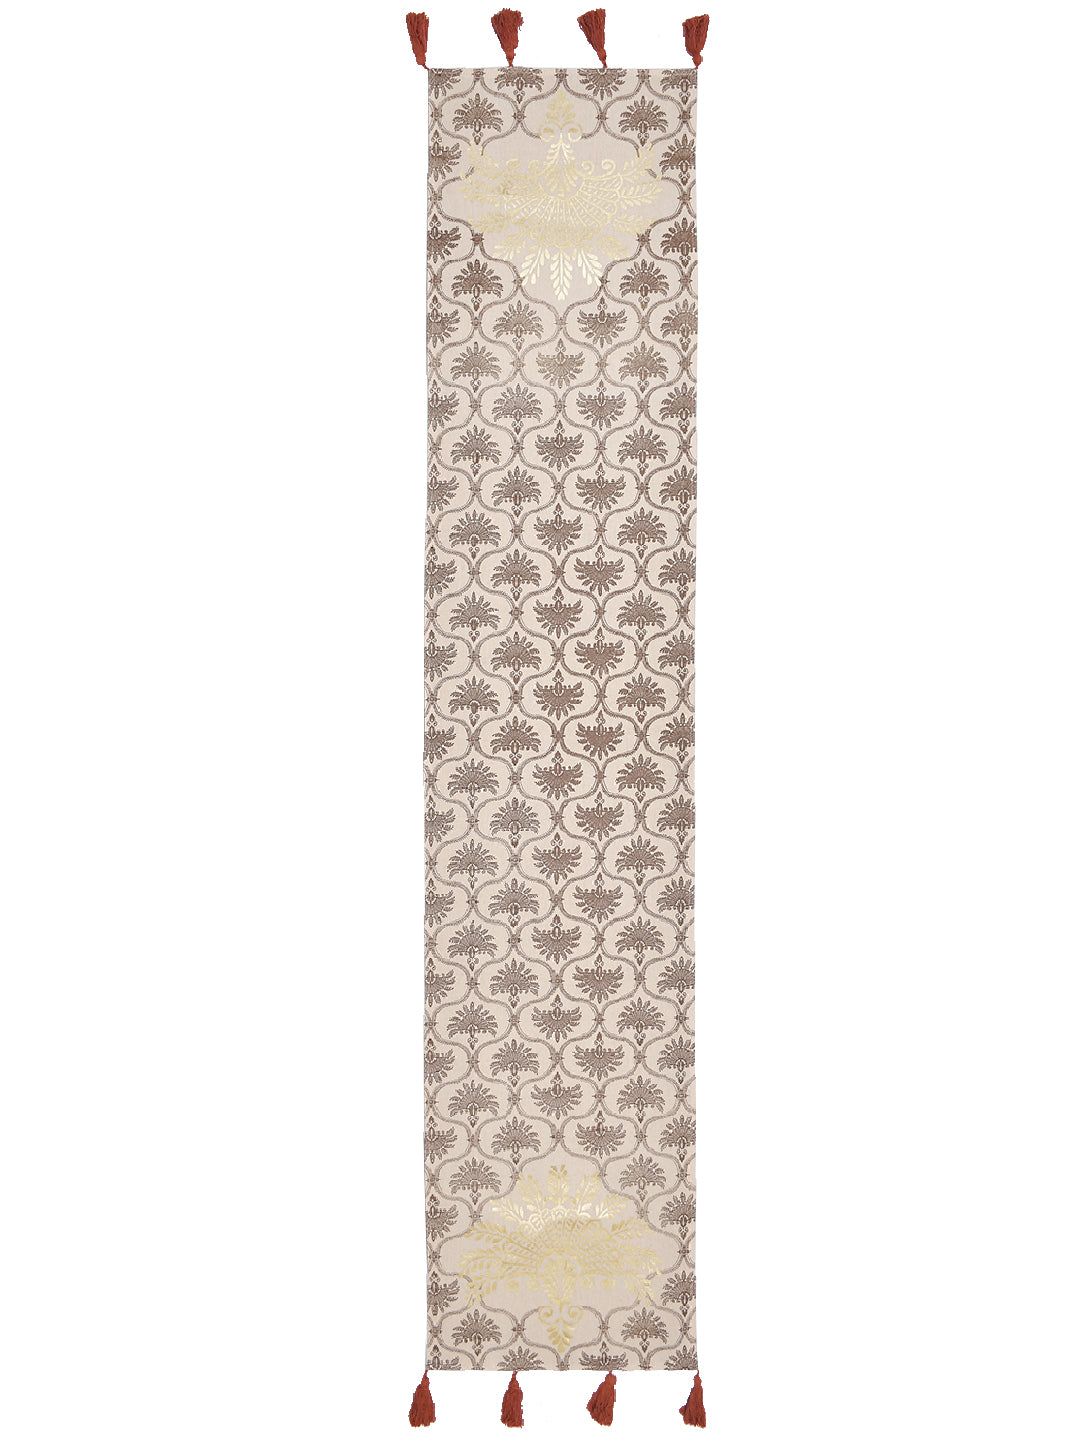 Surkhab Light Brown Cotton Printed 4/6 Seater Table Runner